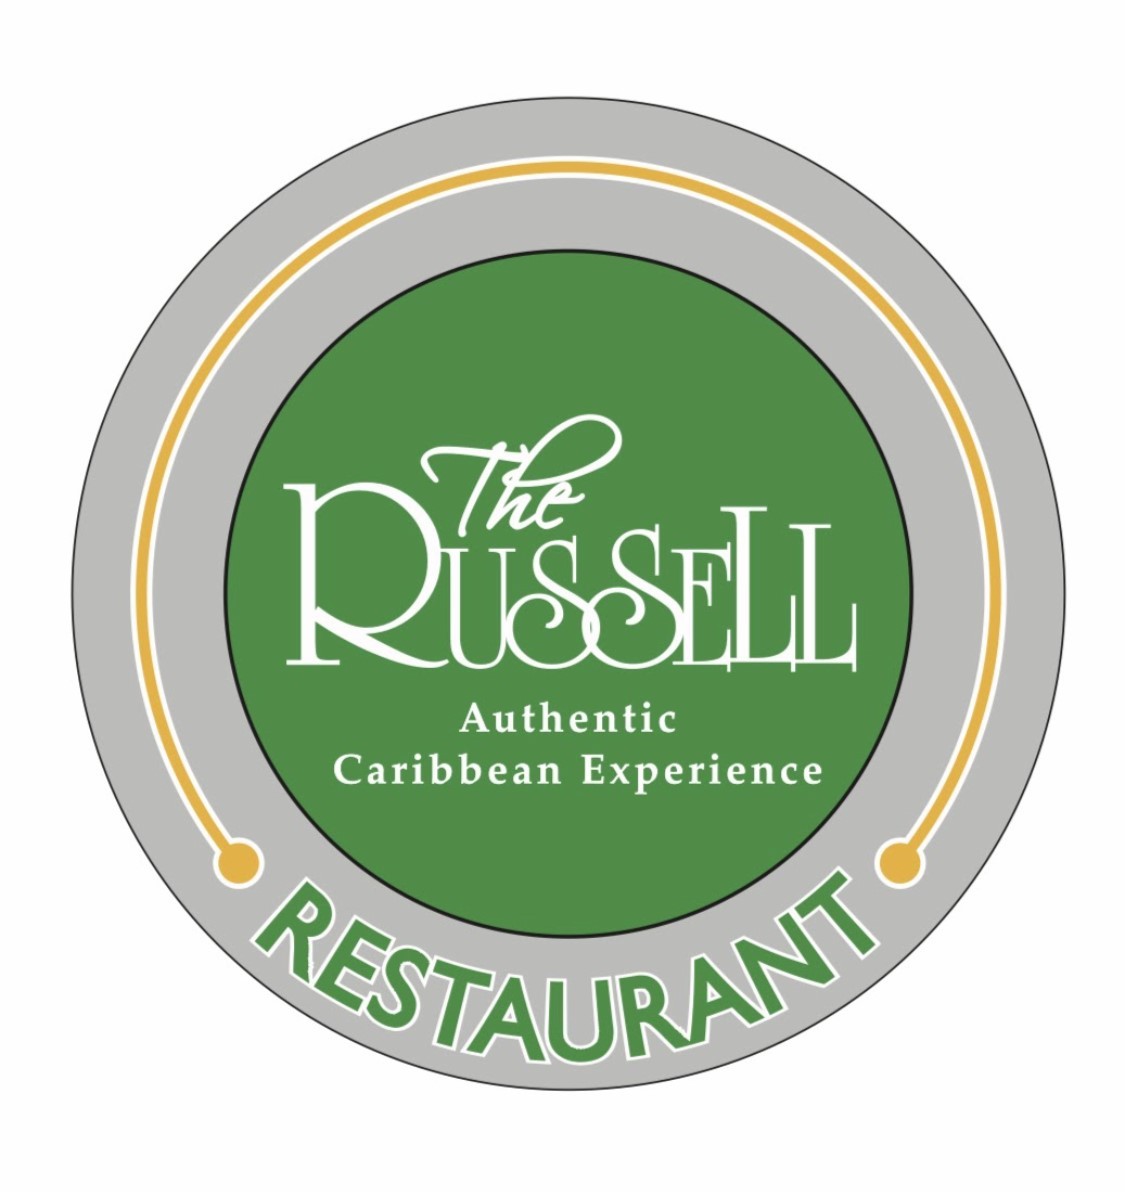 The Russell Restaurant Group West Hartford